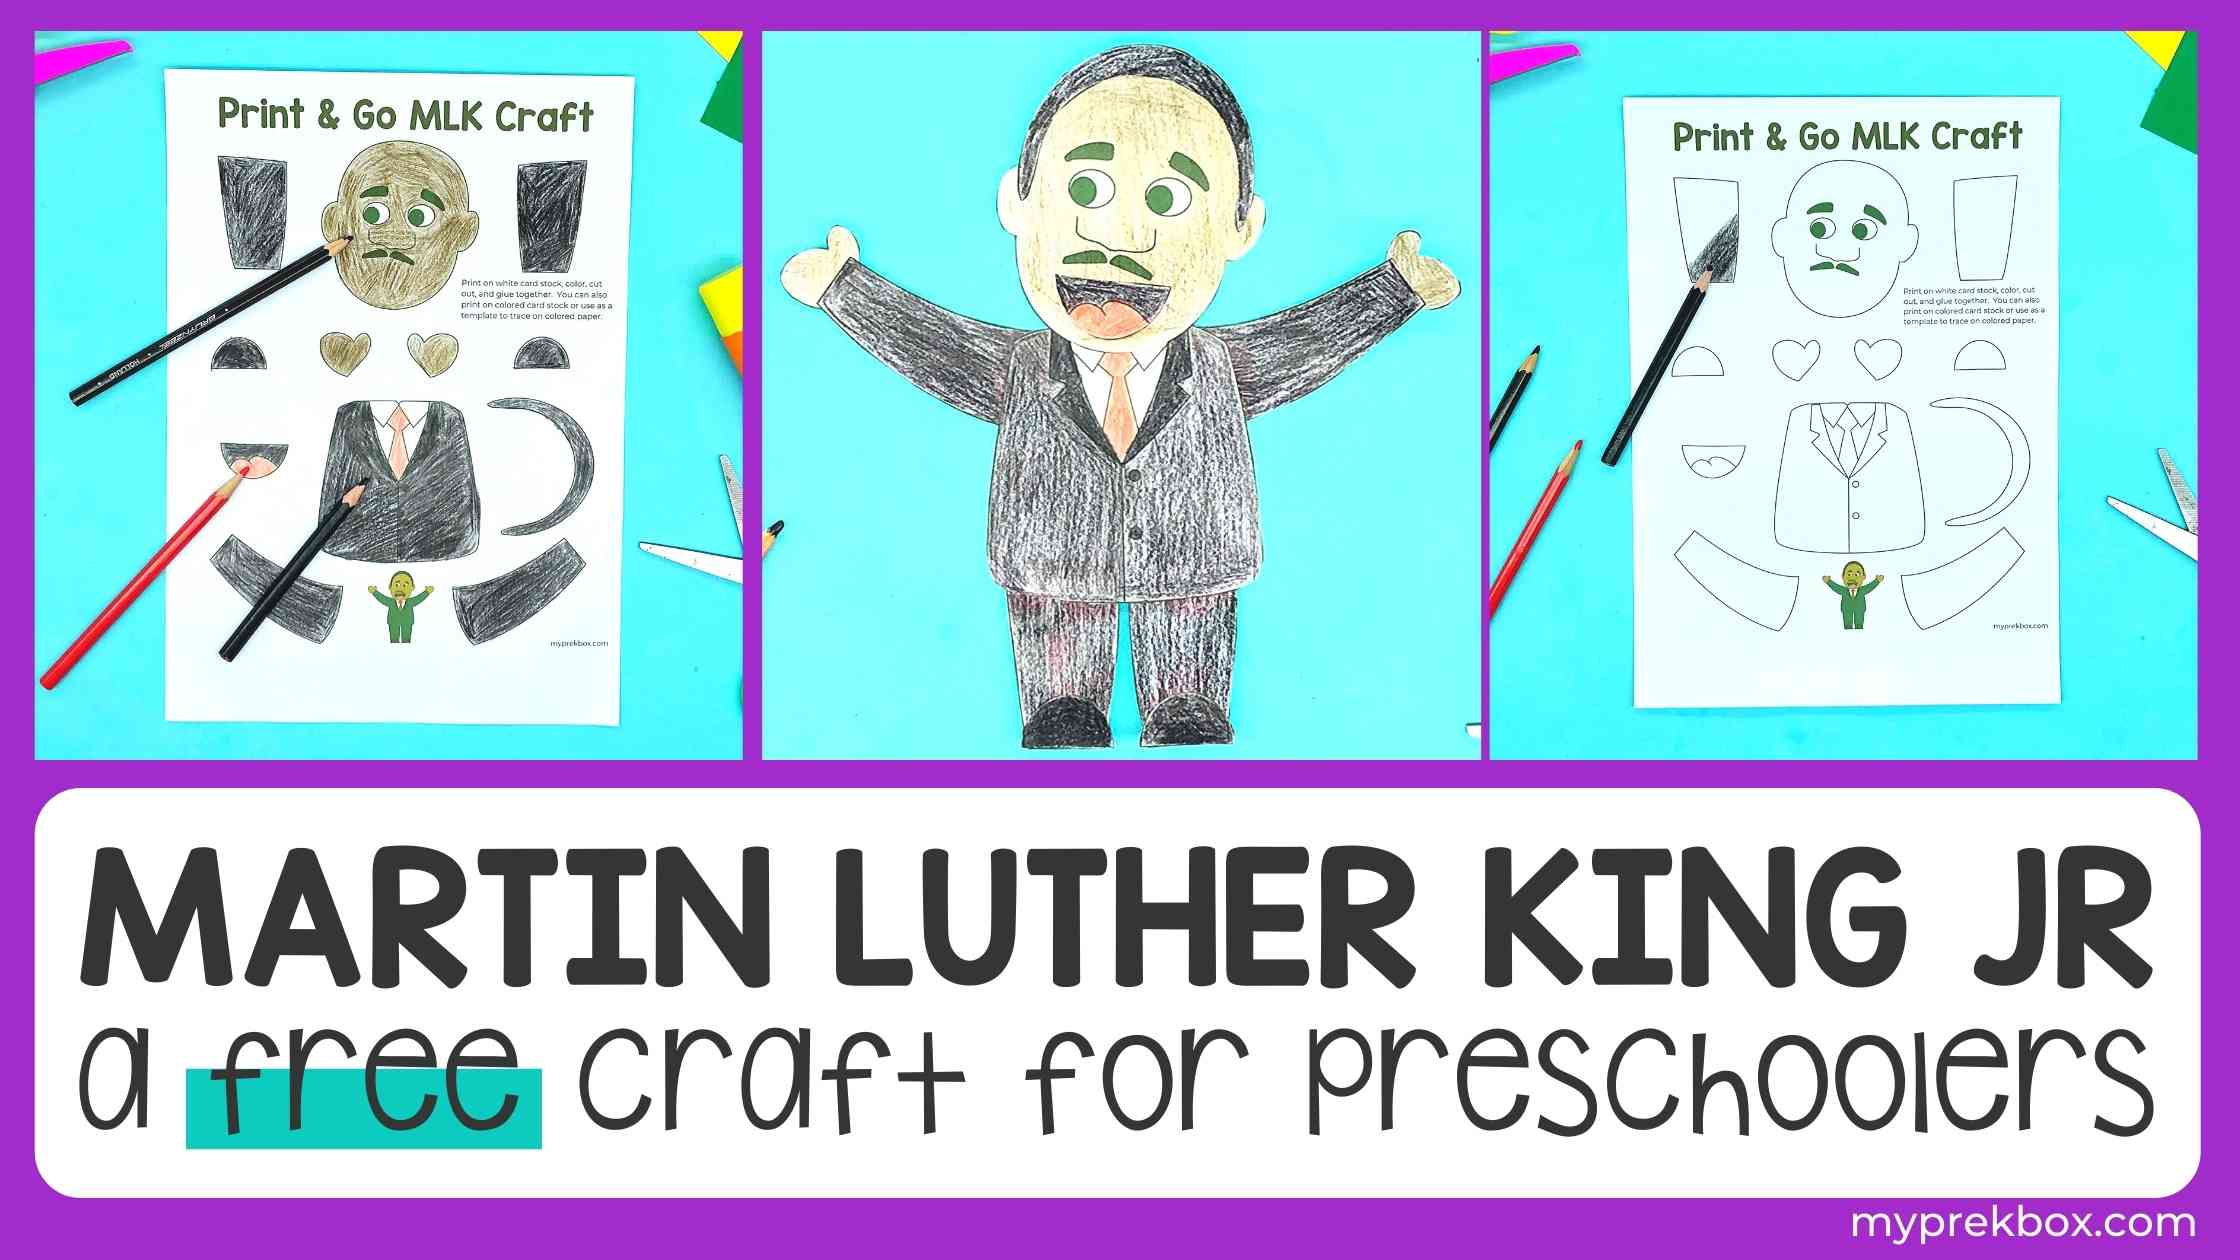 Martin Luther King Jr. Craft for Preschoolers